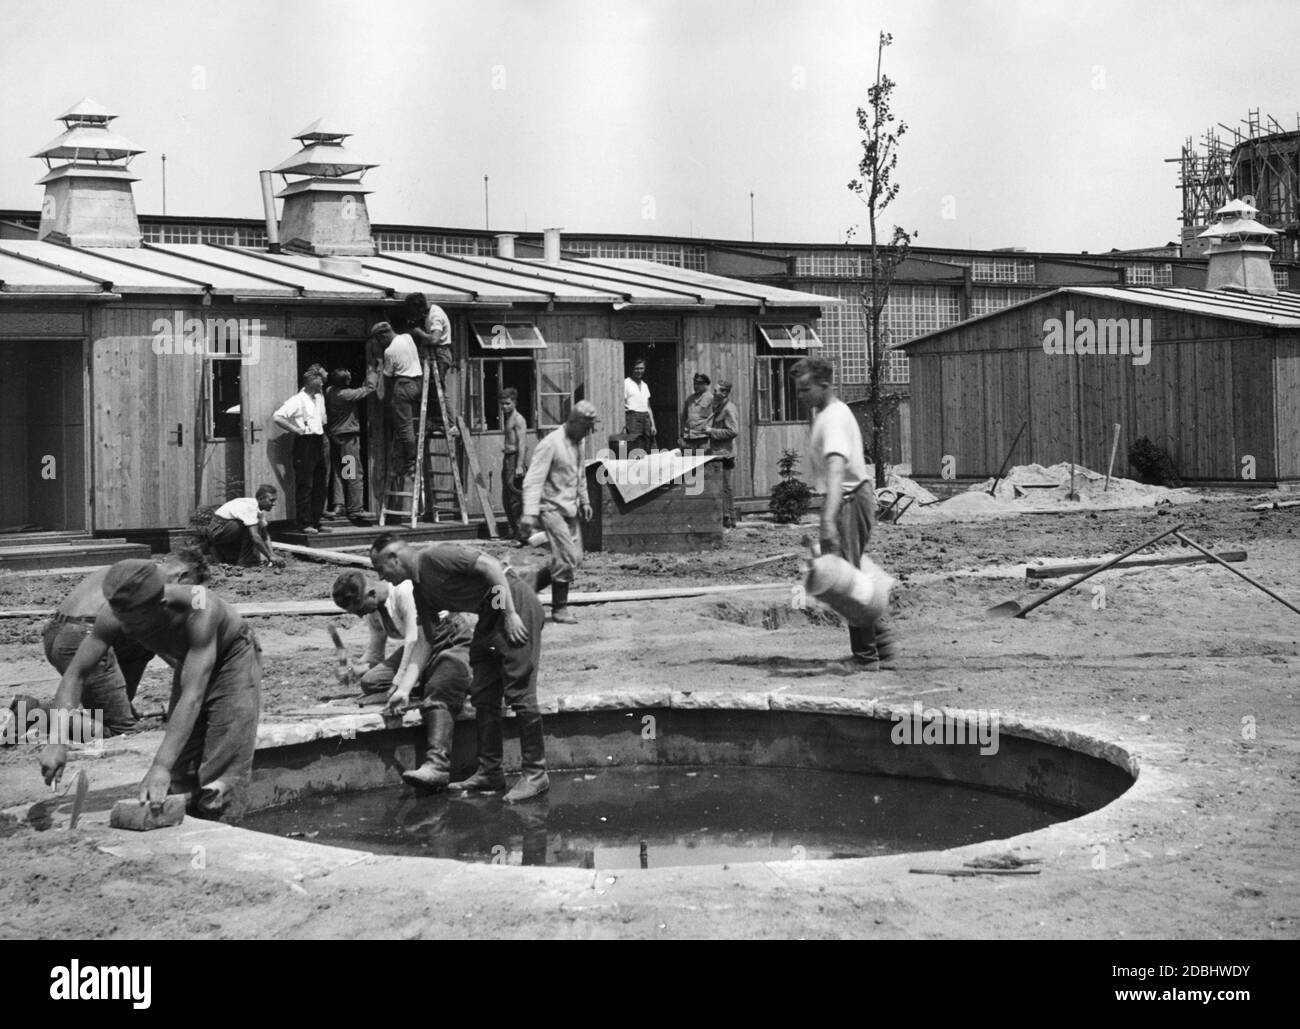 In the course of the Deutschlandausstellung (Germany exhibition) at Kaiserdamm in Berlin, members of the Labour Service are building a paddling pool. In the background are the barracks of the Labour Service. Stock Photo